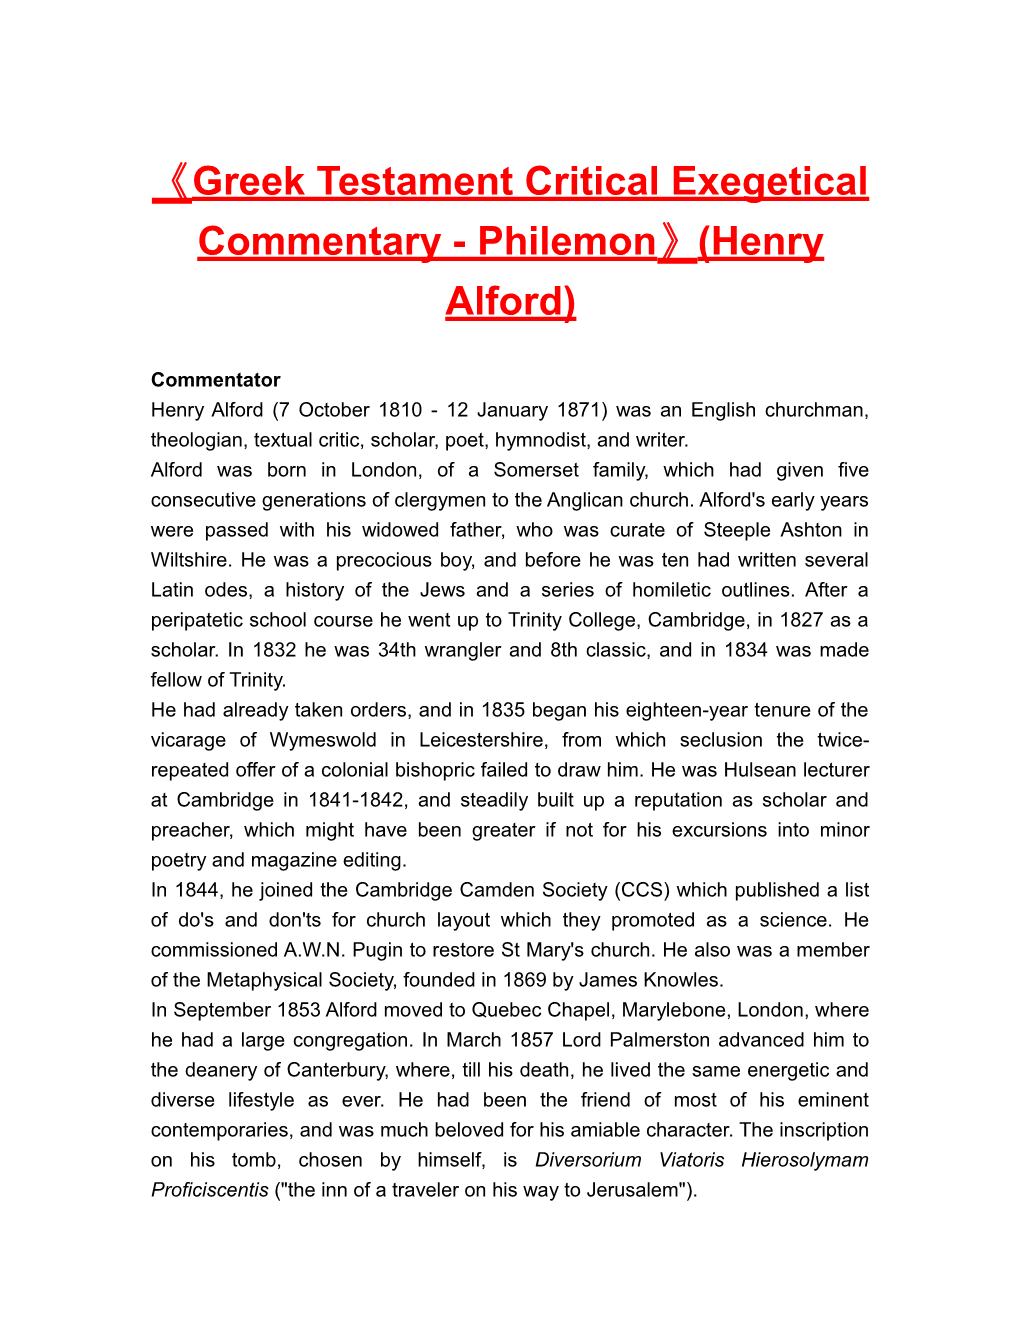 Greek Testament Critical Exegetical Commentary - Philemon (Henry Alford)